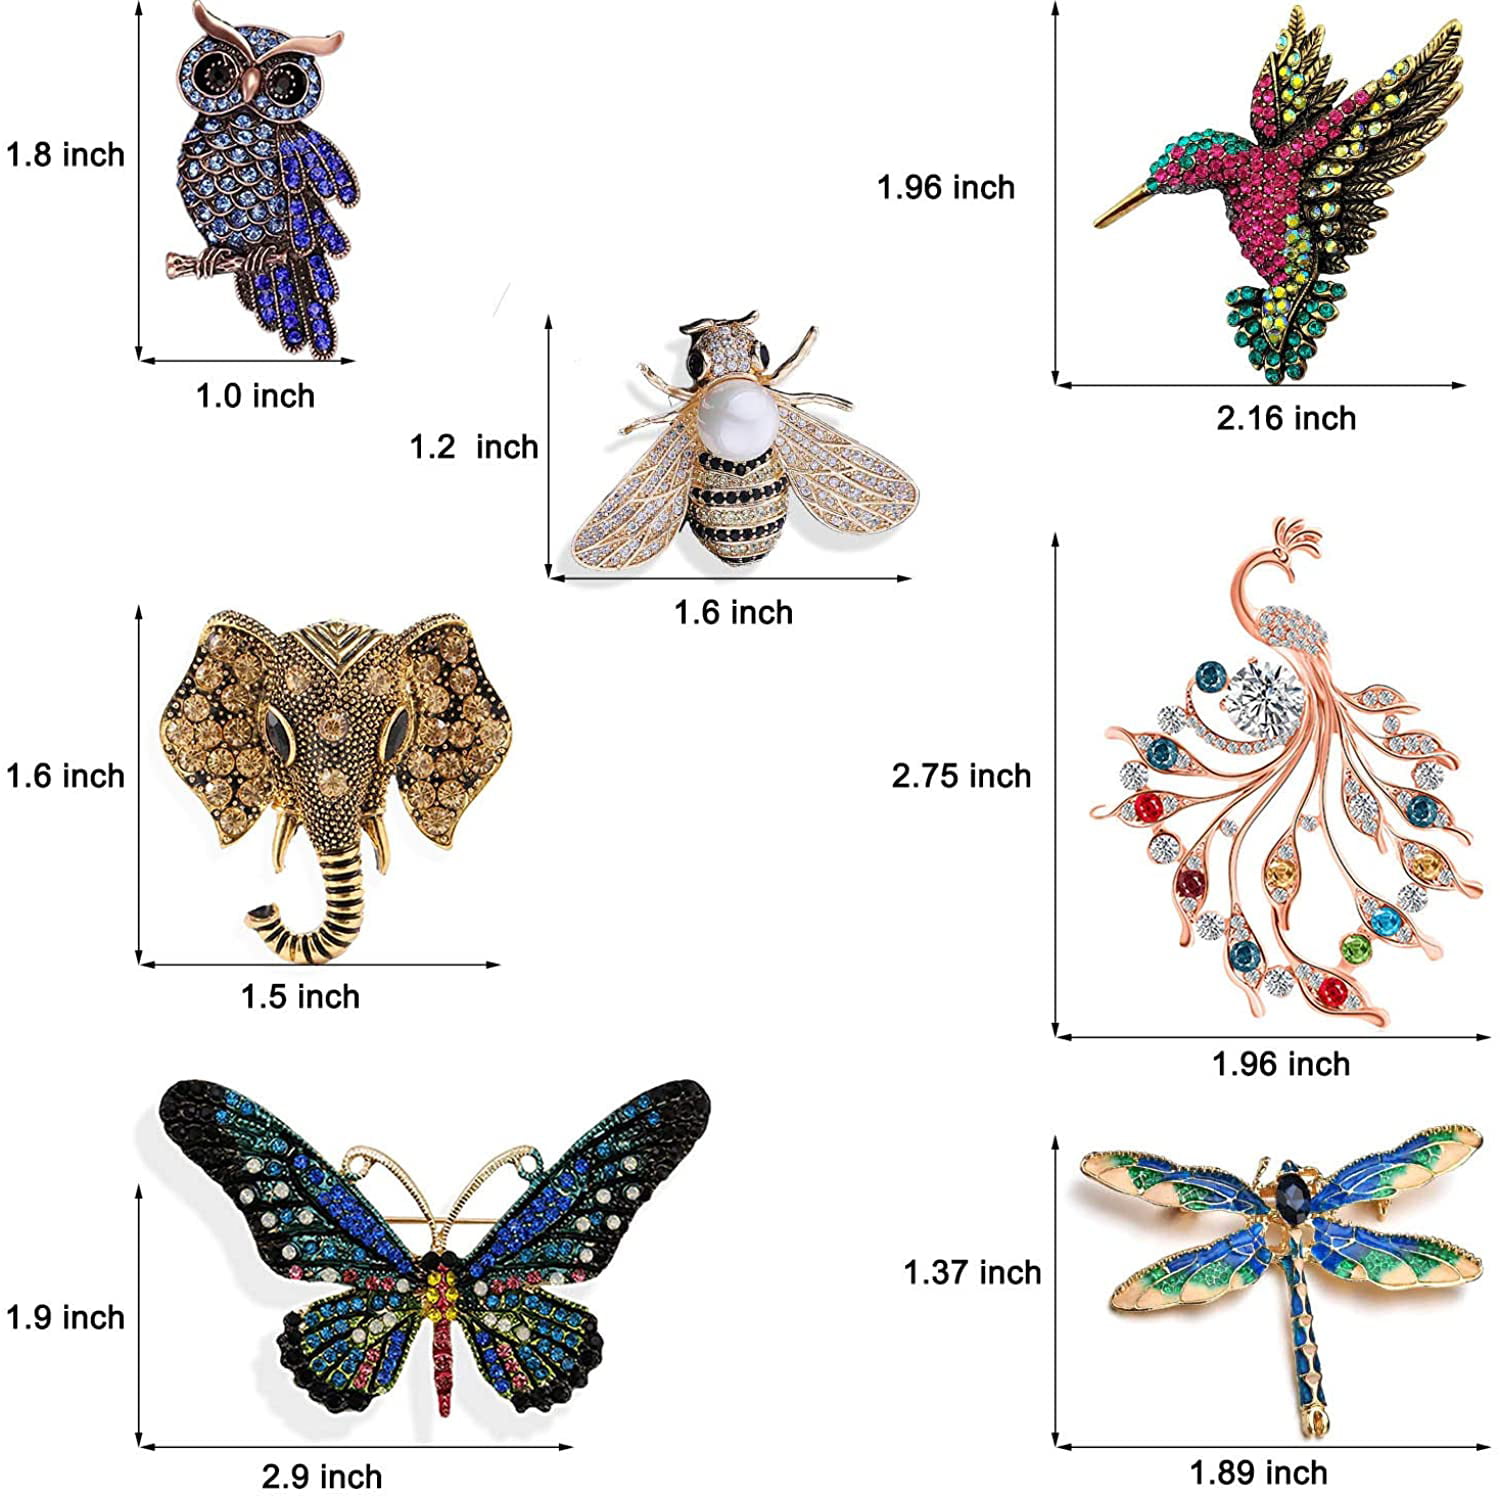 12 Pieces Women Brooch Set Rhinestone Animal Pin Crystal Vintage with Hummingbird Owl Elephant Peacock Bee Insect Brooch Pin Animal Shape Brooch Pins Butterfly Pin for Women Girls 